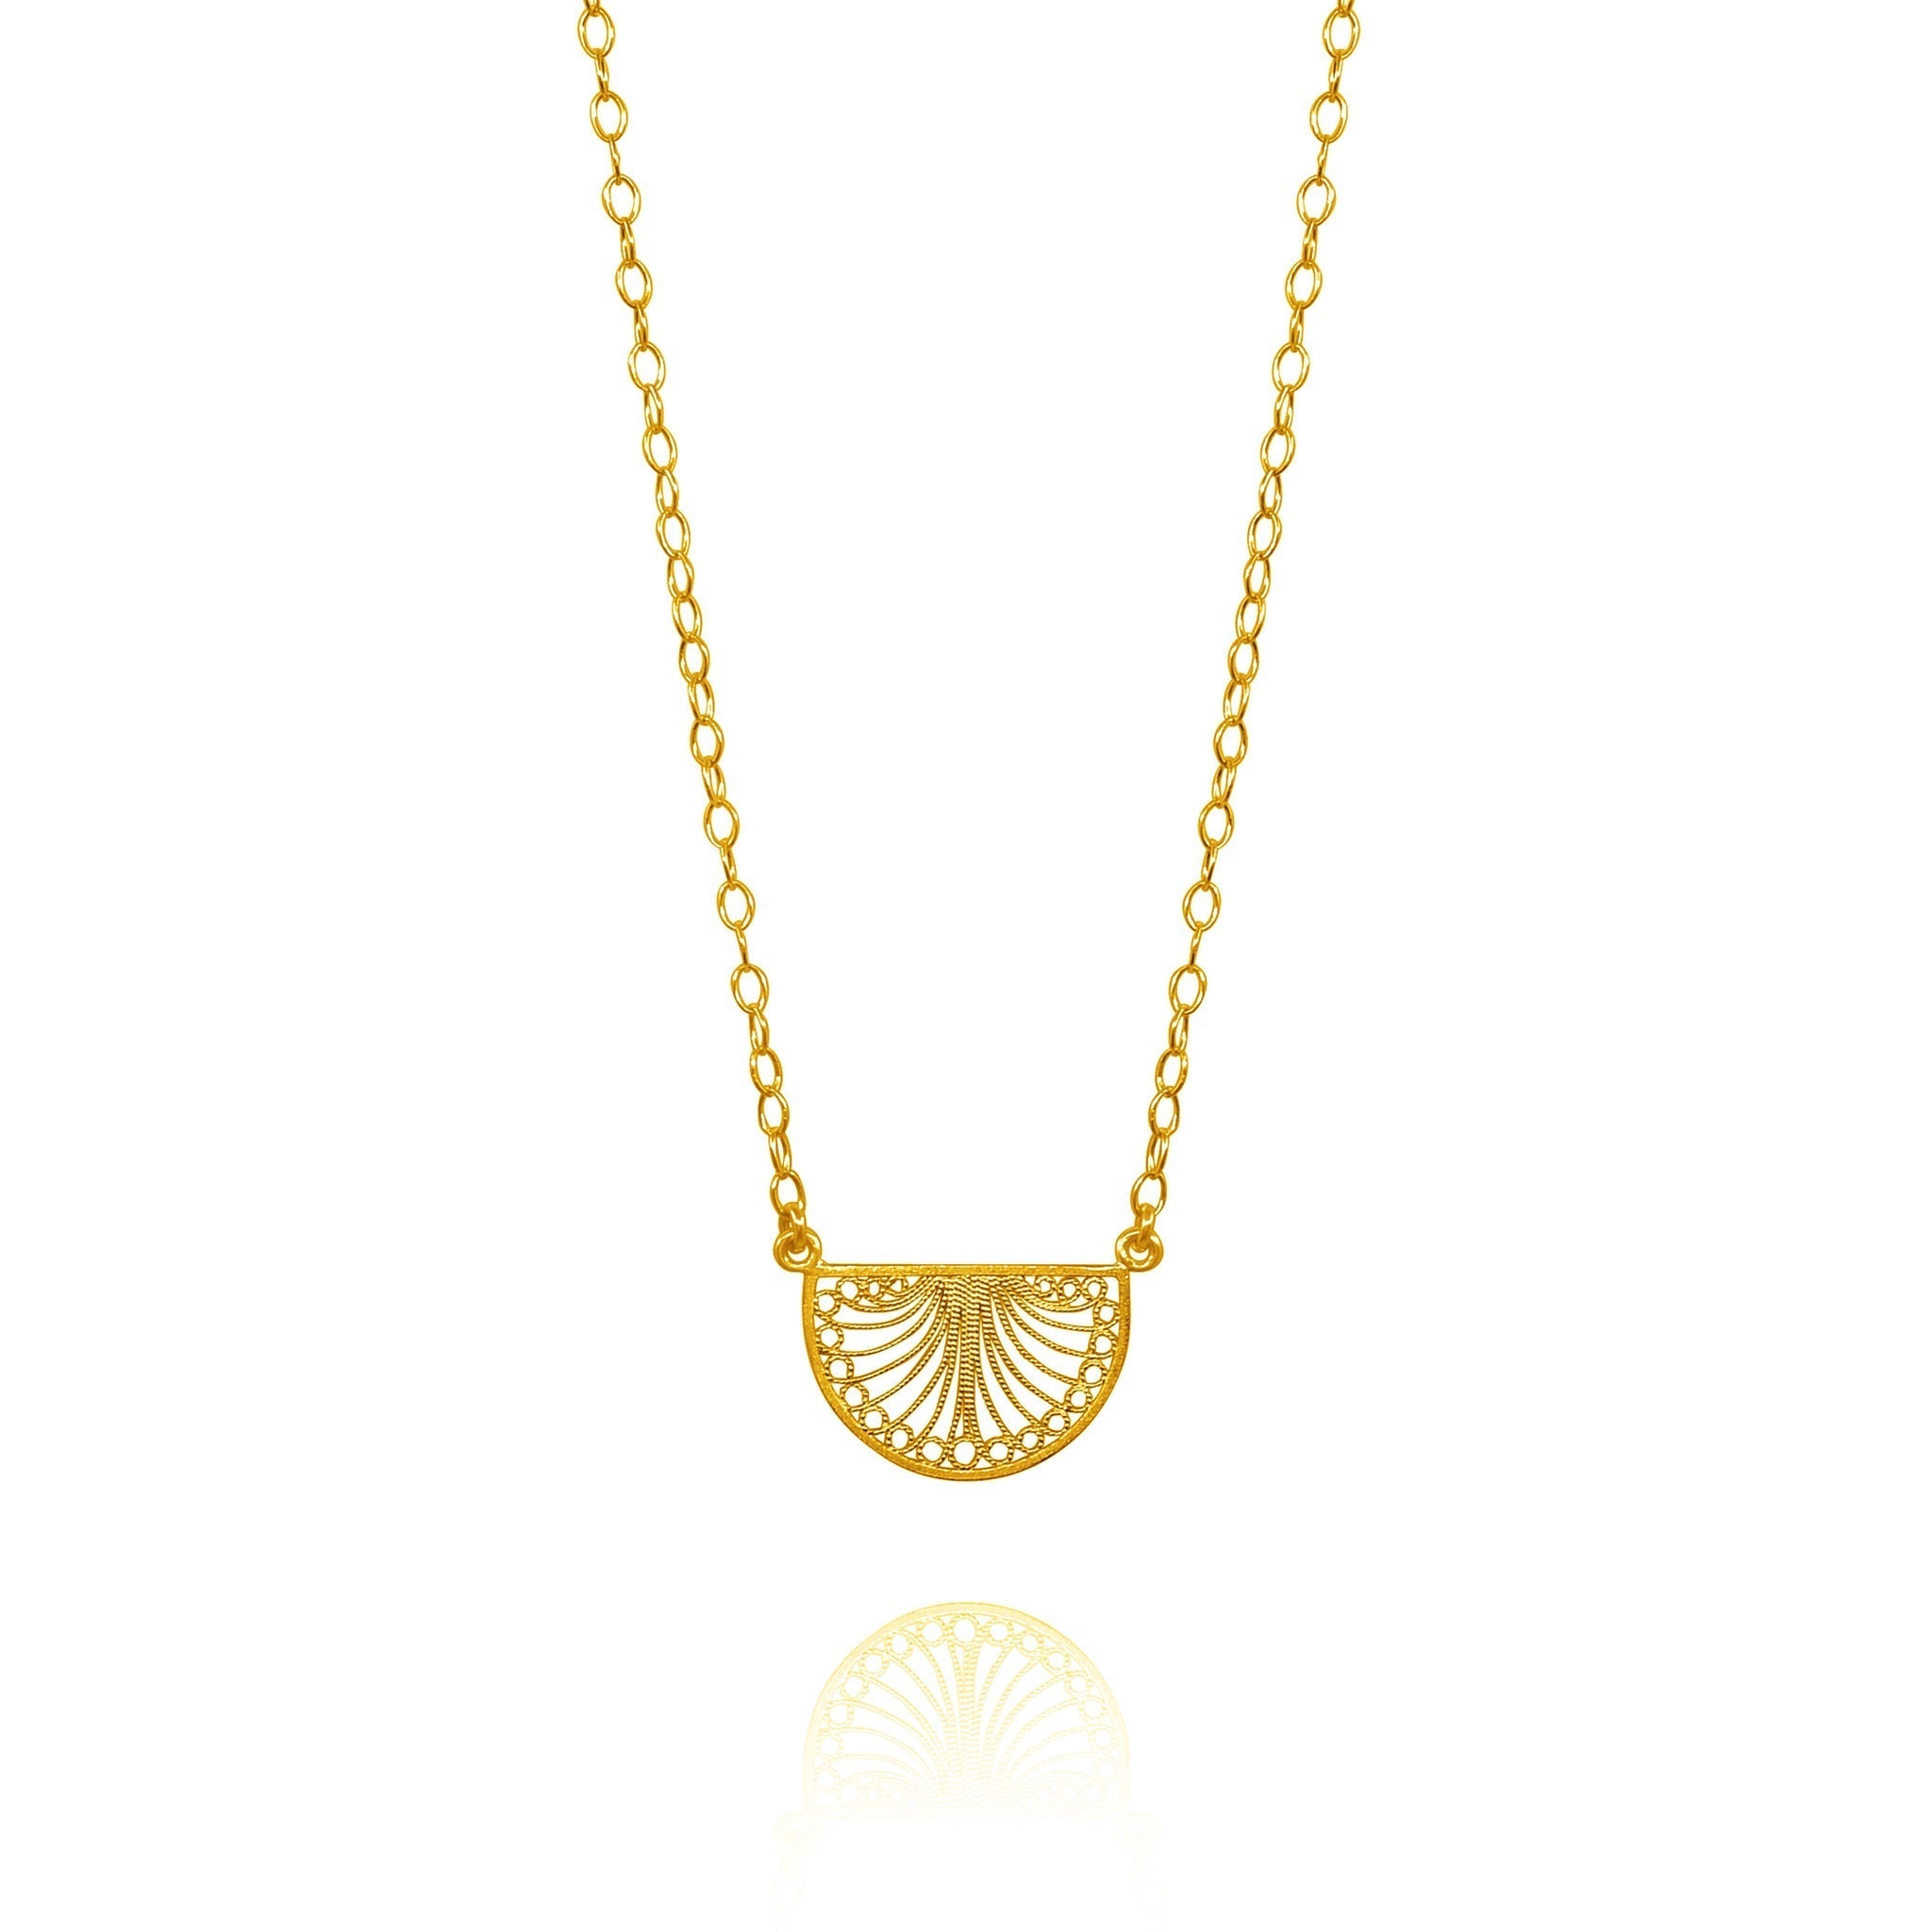 Edith 18k Gold Vermeil Plated Filigree Necklace - 18" - Necklaces